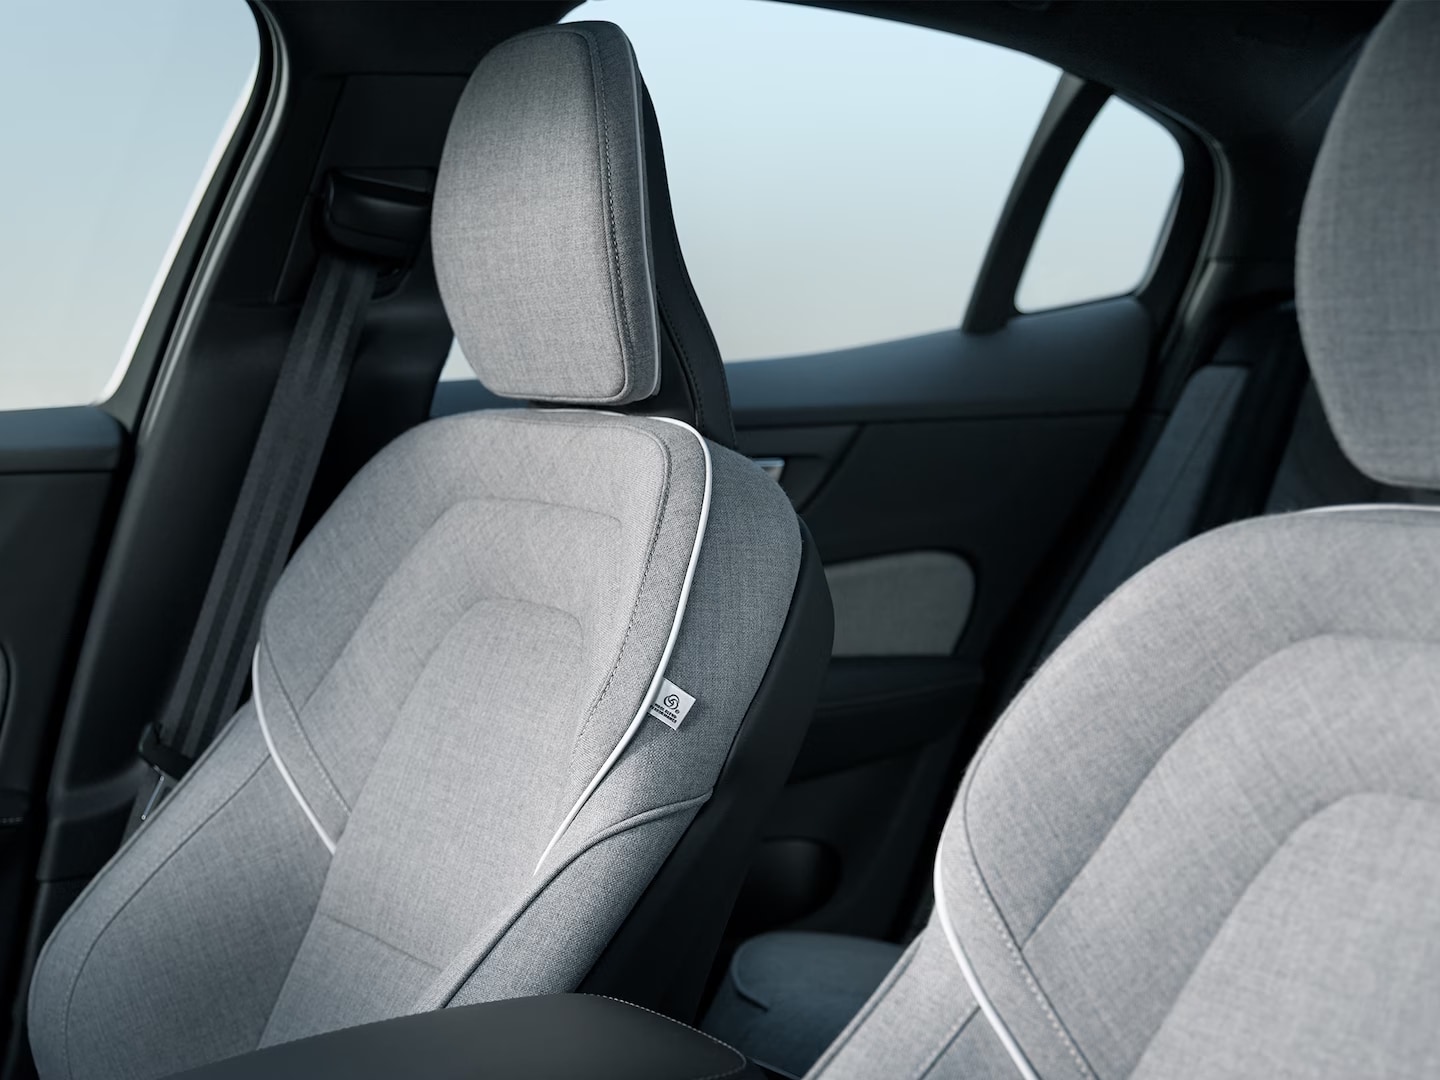 The Volvo S60 Recharge plug-in hybrid’s front passenger and driver’s seats in gray Tailored Wool Blend upholstery with white trim.